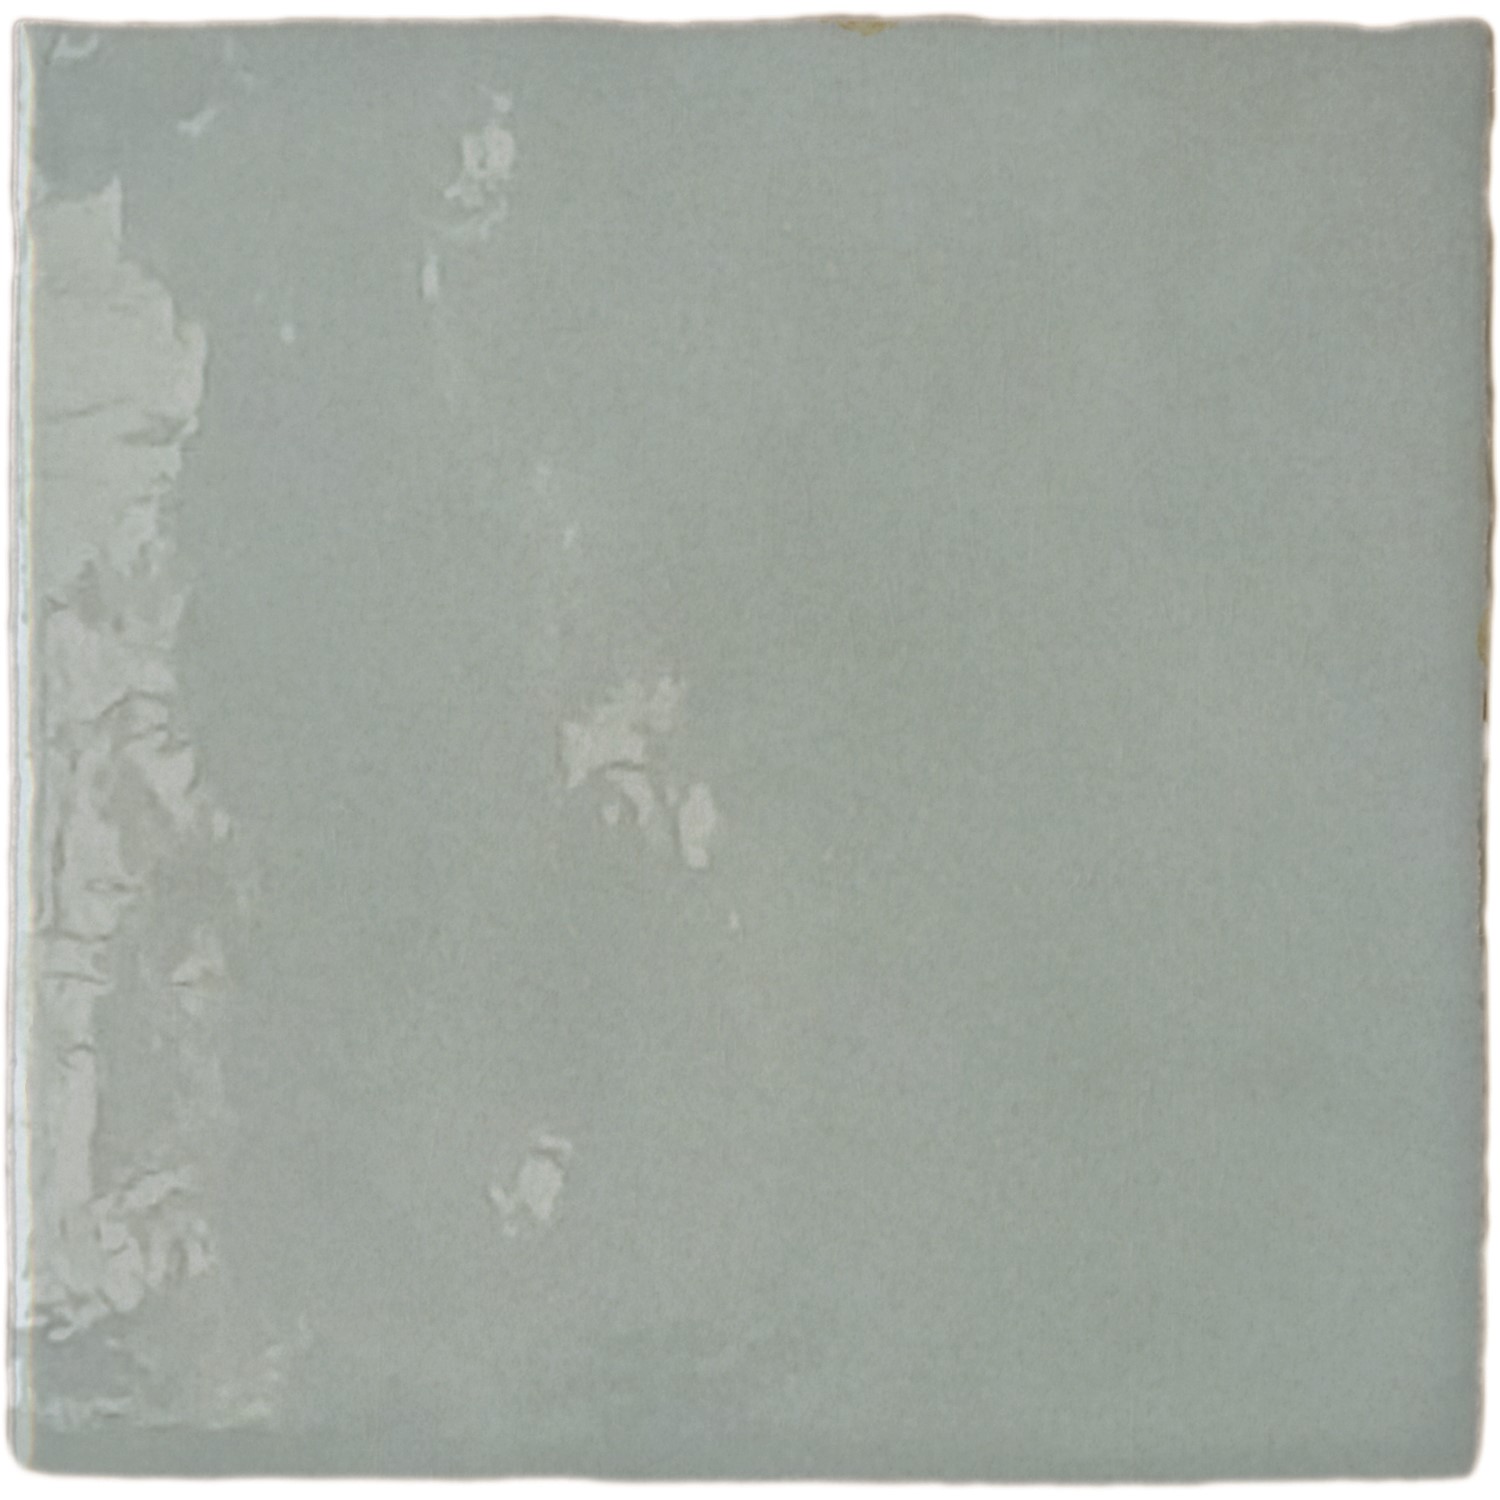 Teal Shaded Effect Wall Tile 13.2 x 13.2cm - Sombra